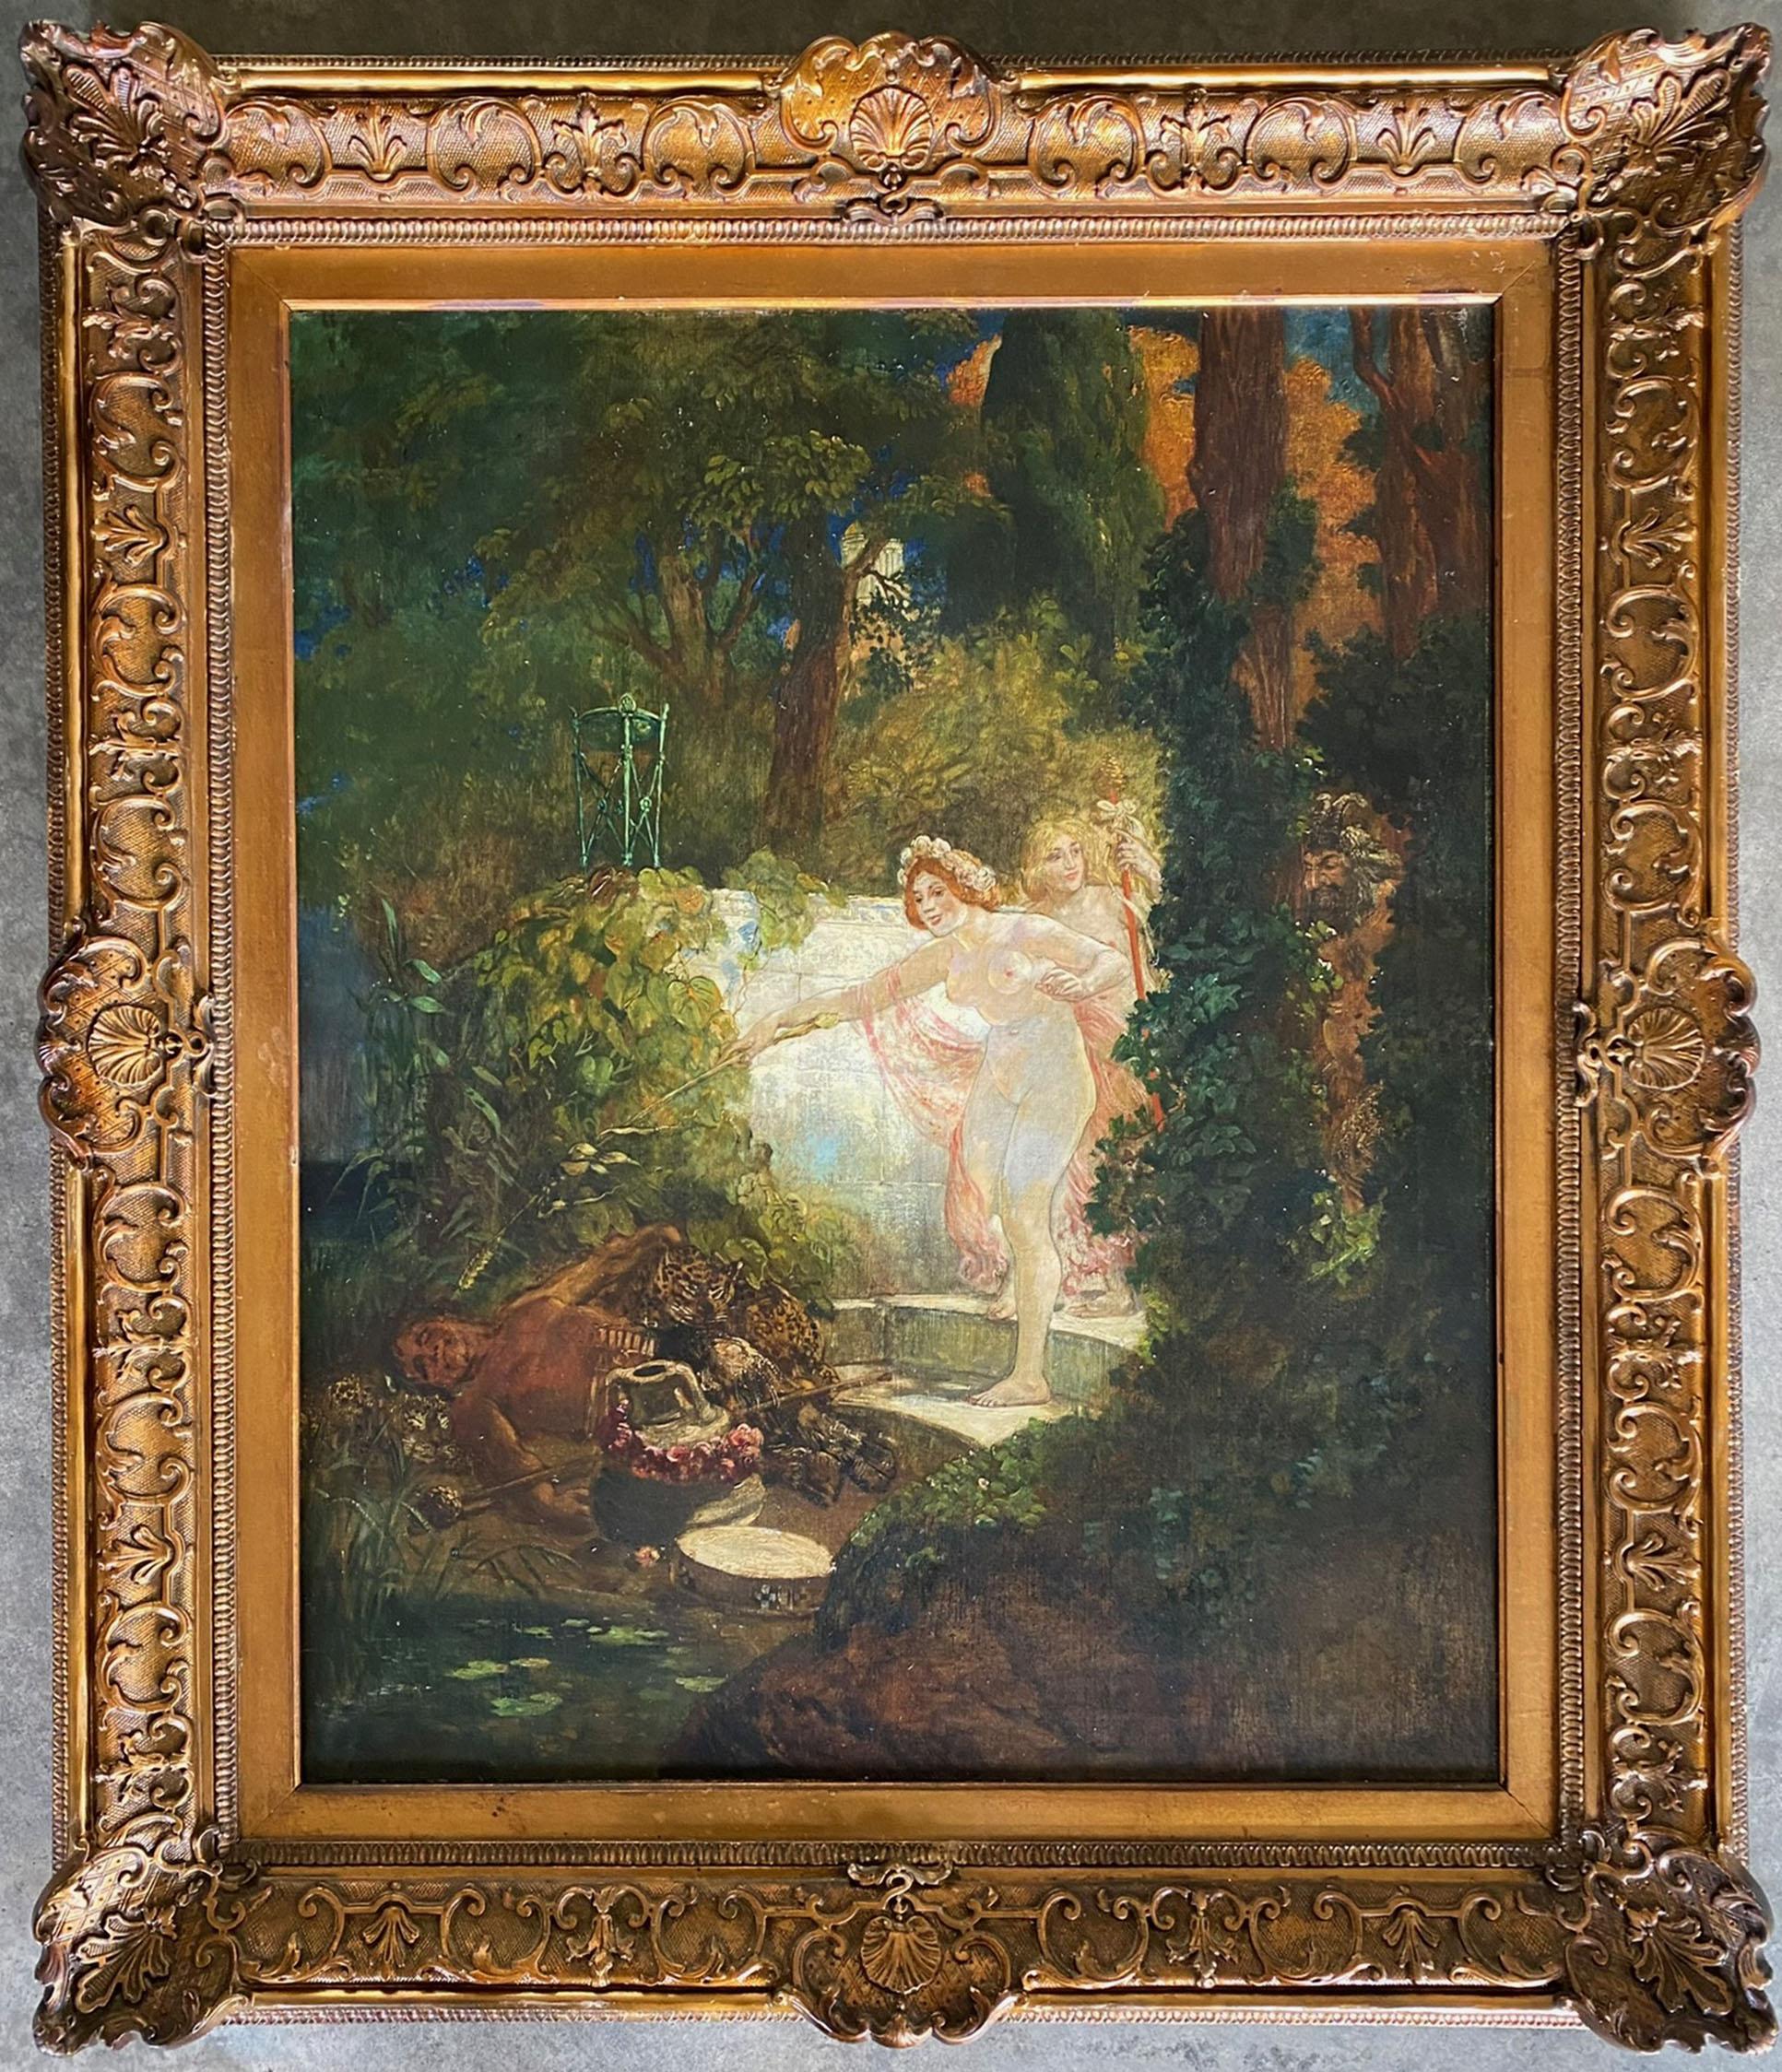 THE BACCANALE IN THE FOREST – Painting von Alexander Frenz